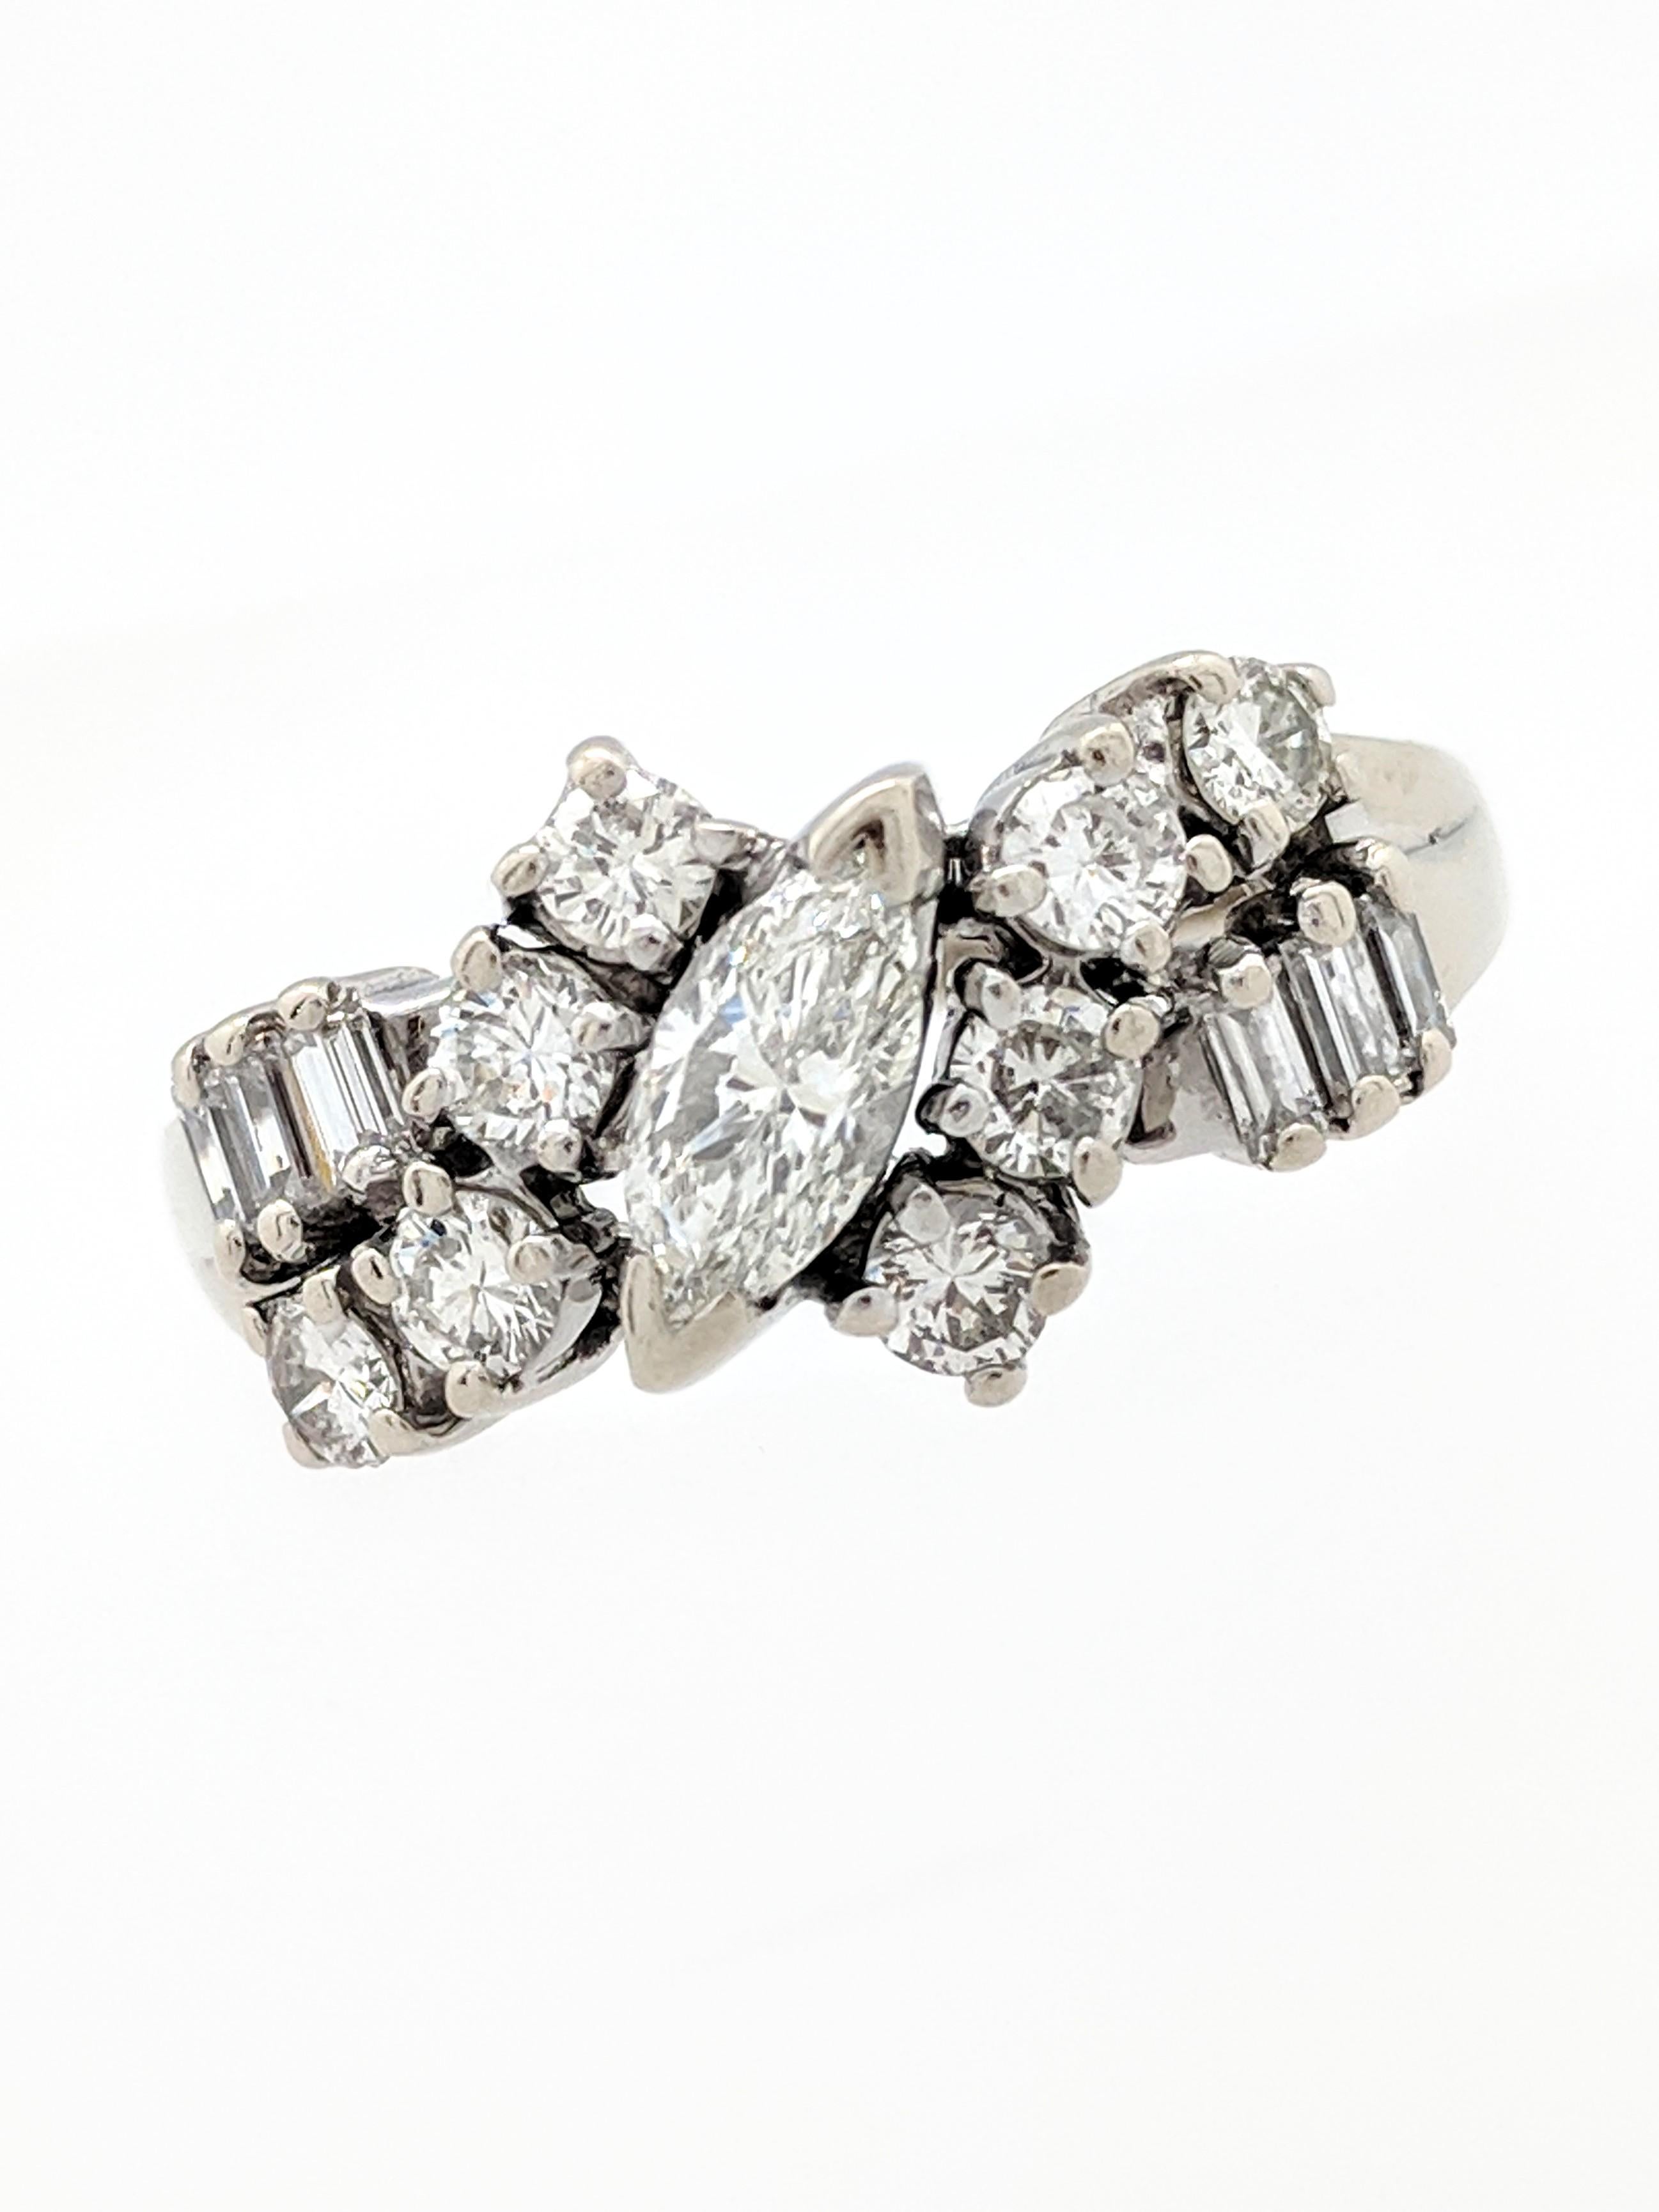 14k White Gold Diamond Estate Ring

You are viewing a beautiful diamond estate ring. This ring is crafted from 14k white gold and weighs 4.2 grams. It features one (1) .25ct natural marquise cut diamond, (8) .07ct natural round brilliant cut